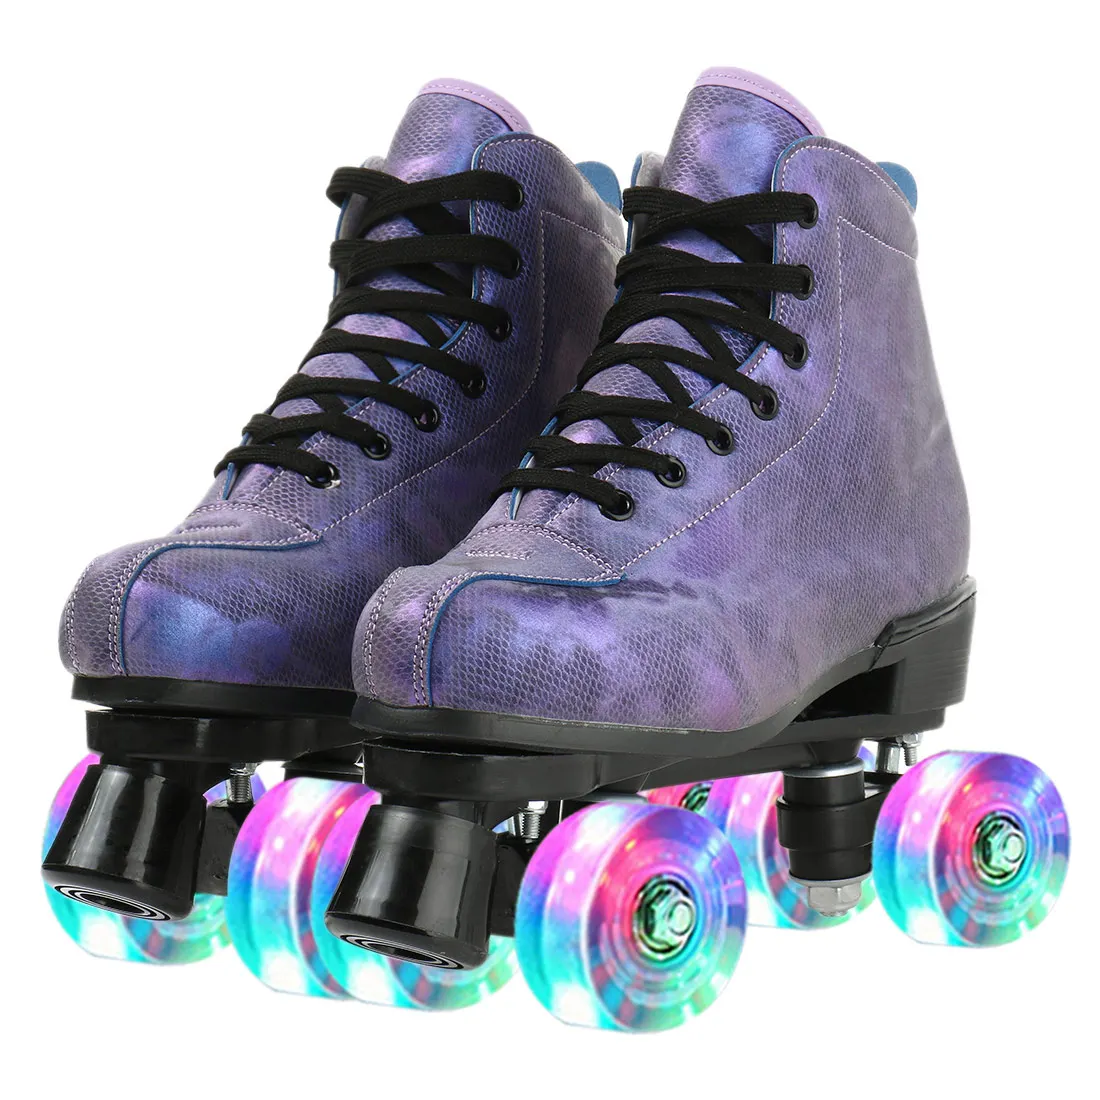 

4 Wheel Artificial Flash Fibre Roller Skate Shoes Skating Sliding Inline Skates Rollers Sneakers Training Scrub Row For Adult